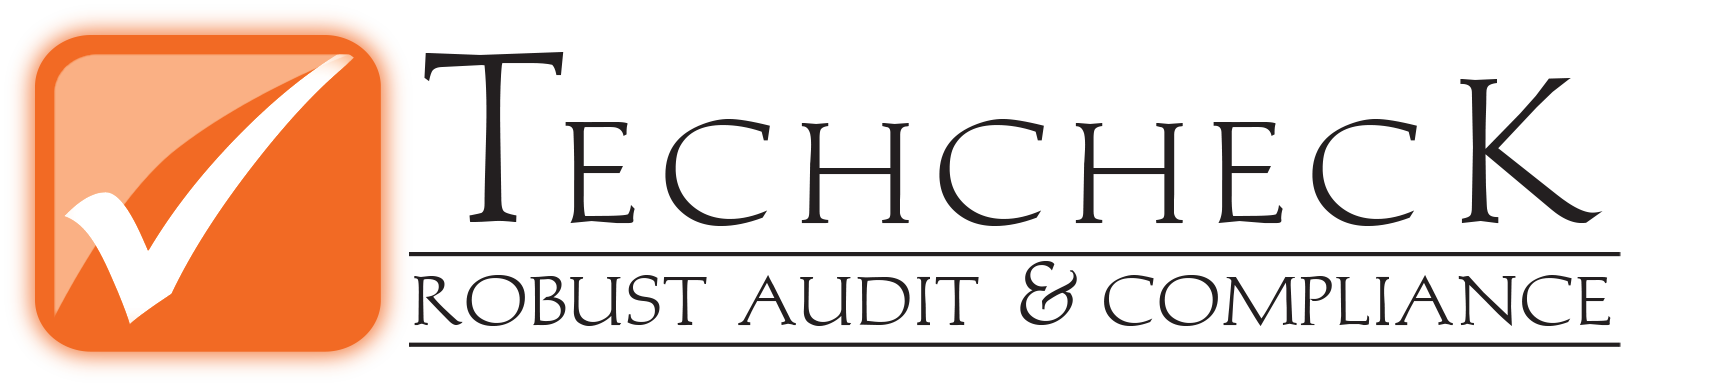 Audit & Compliance made simple.